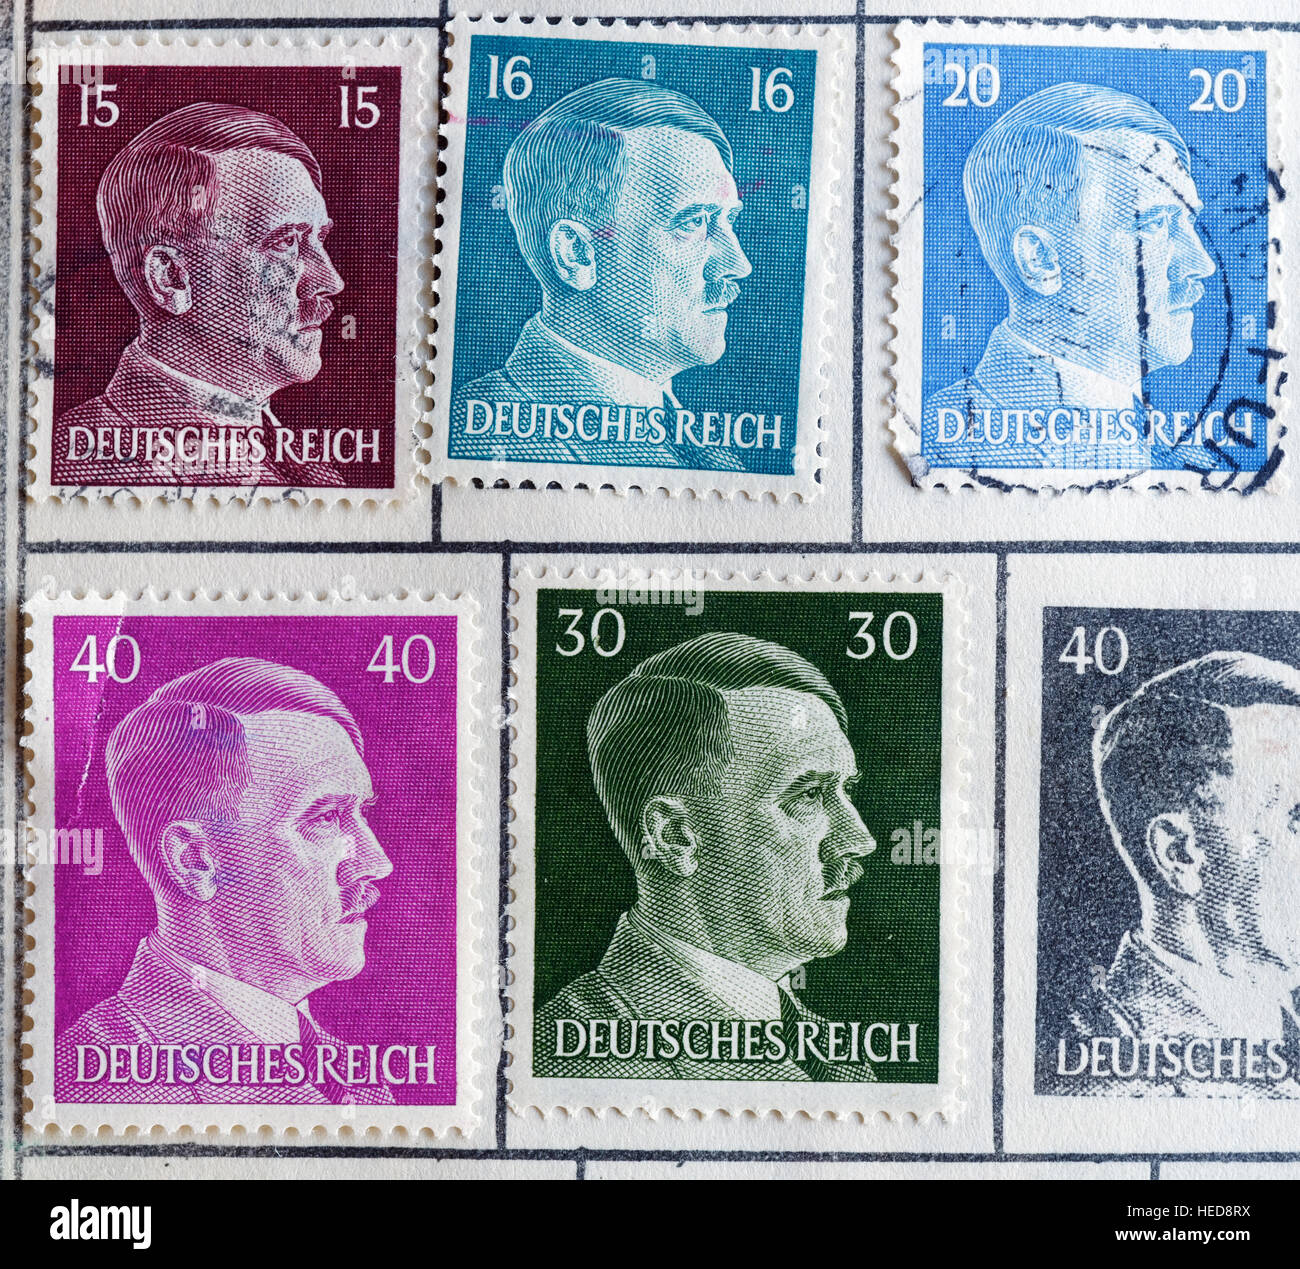 German postage stamps showing a portrait of Adolf Hitler Stock Photo